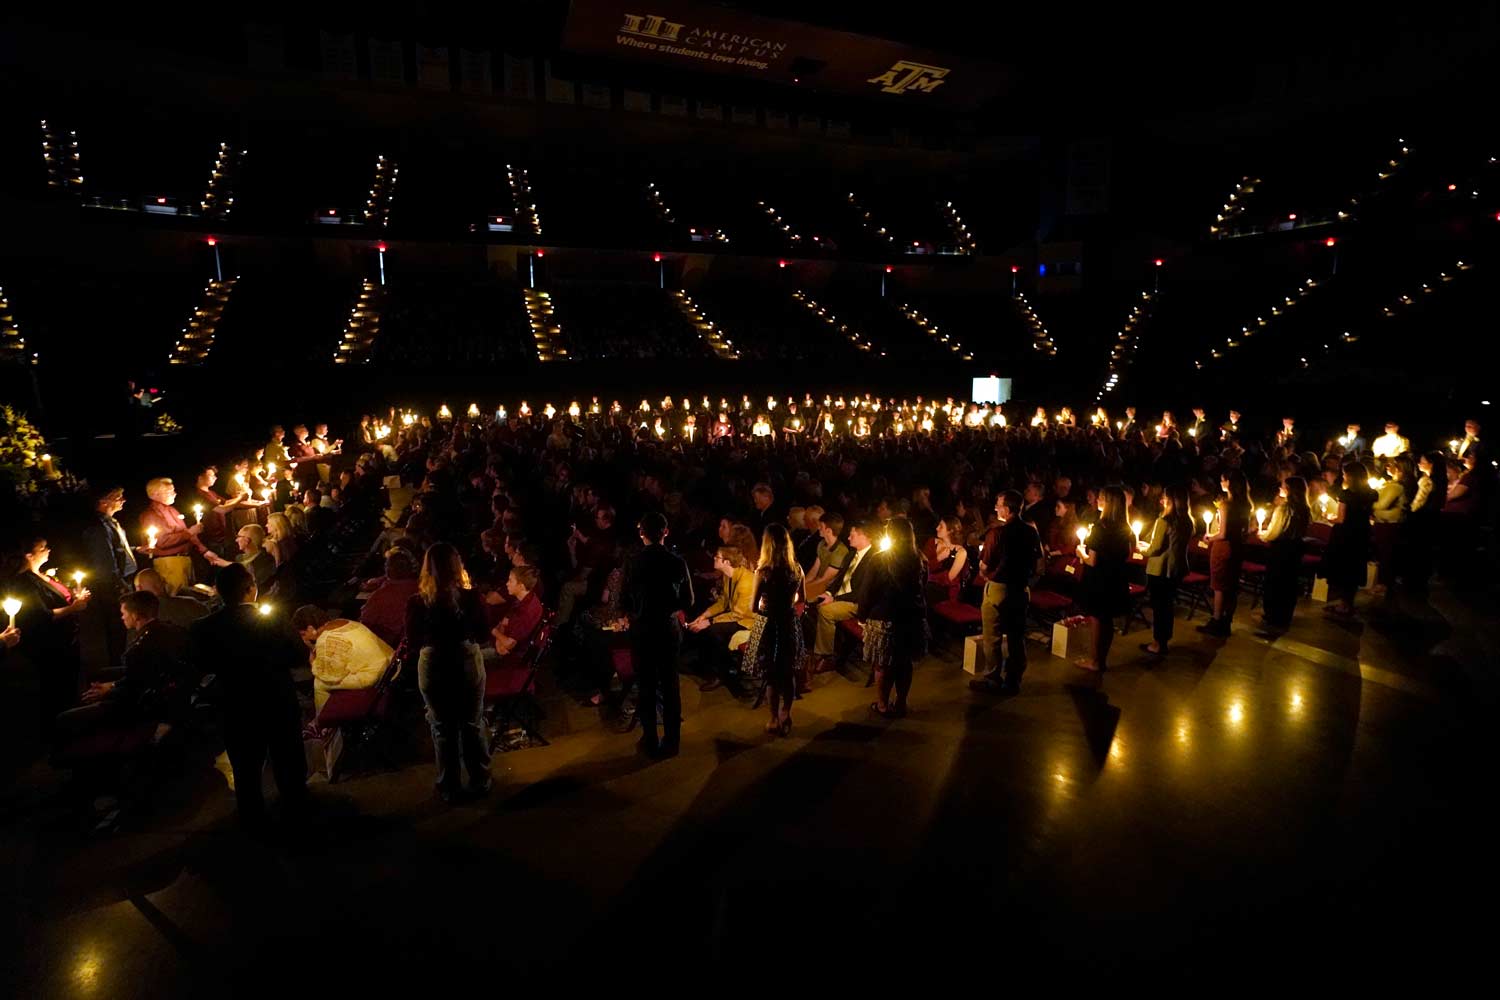 A view of the muster candles from the stands of Reed Arena